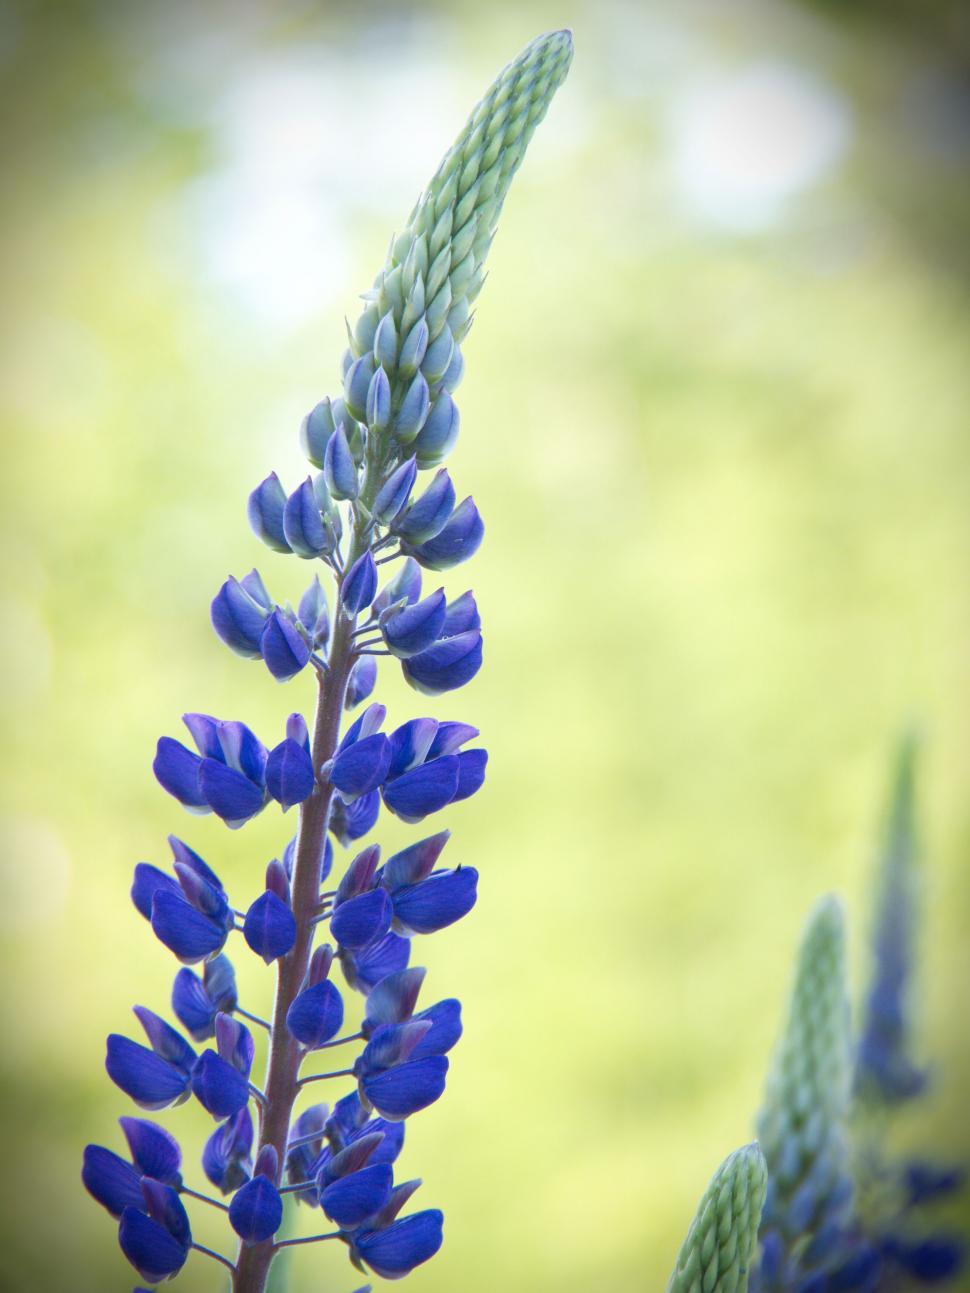 Free Image of Vivid Blue Lupine Flowers Against Green 